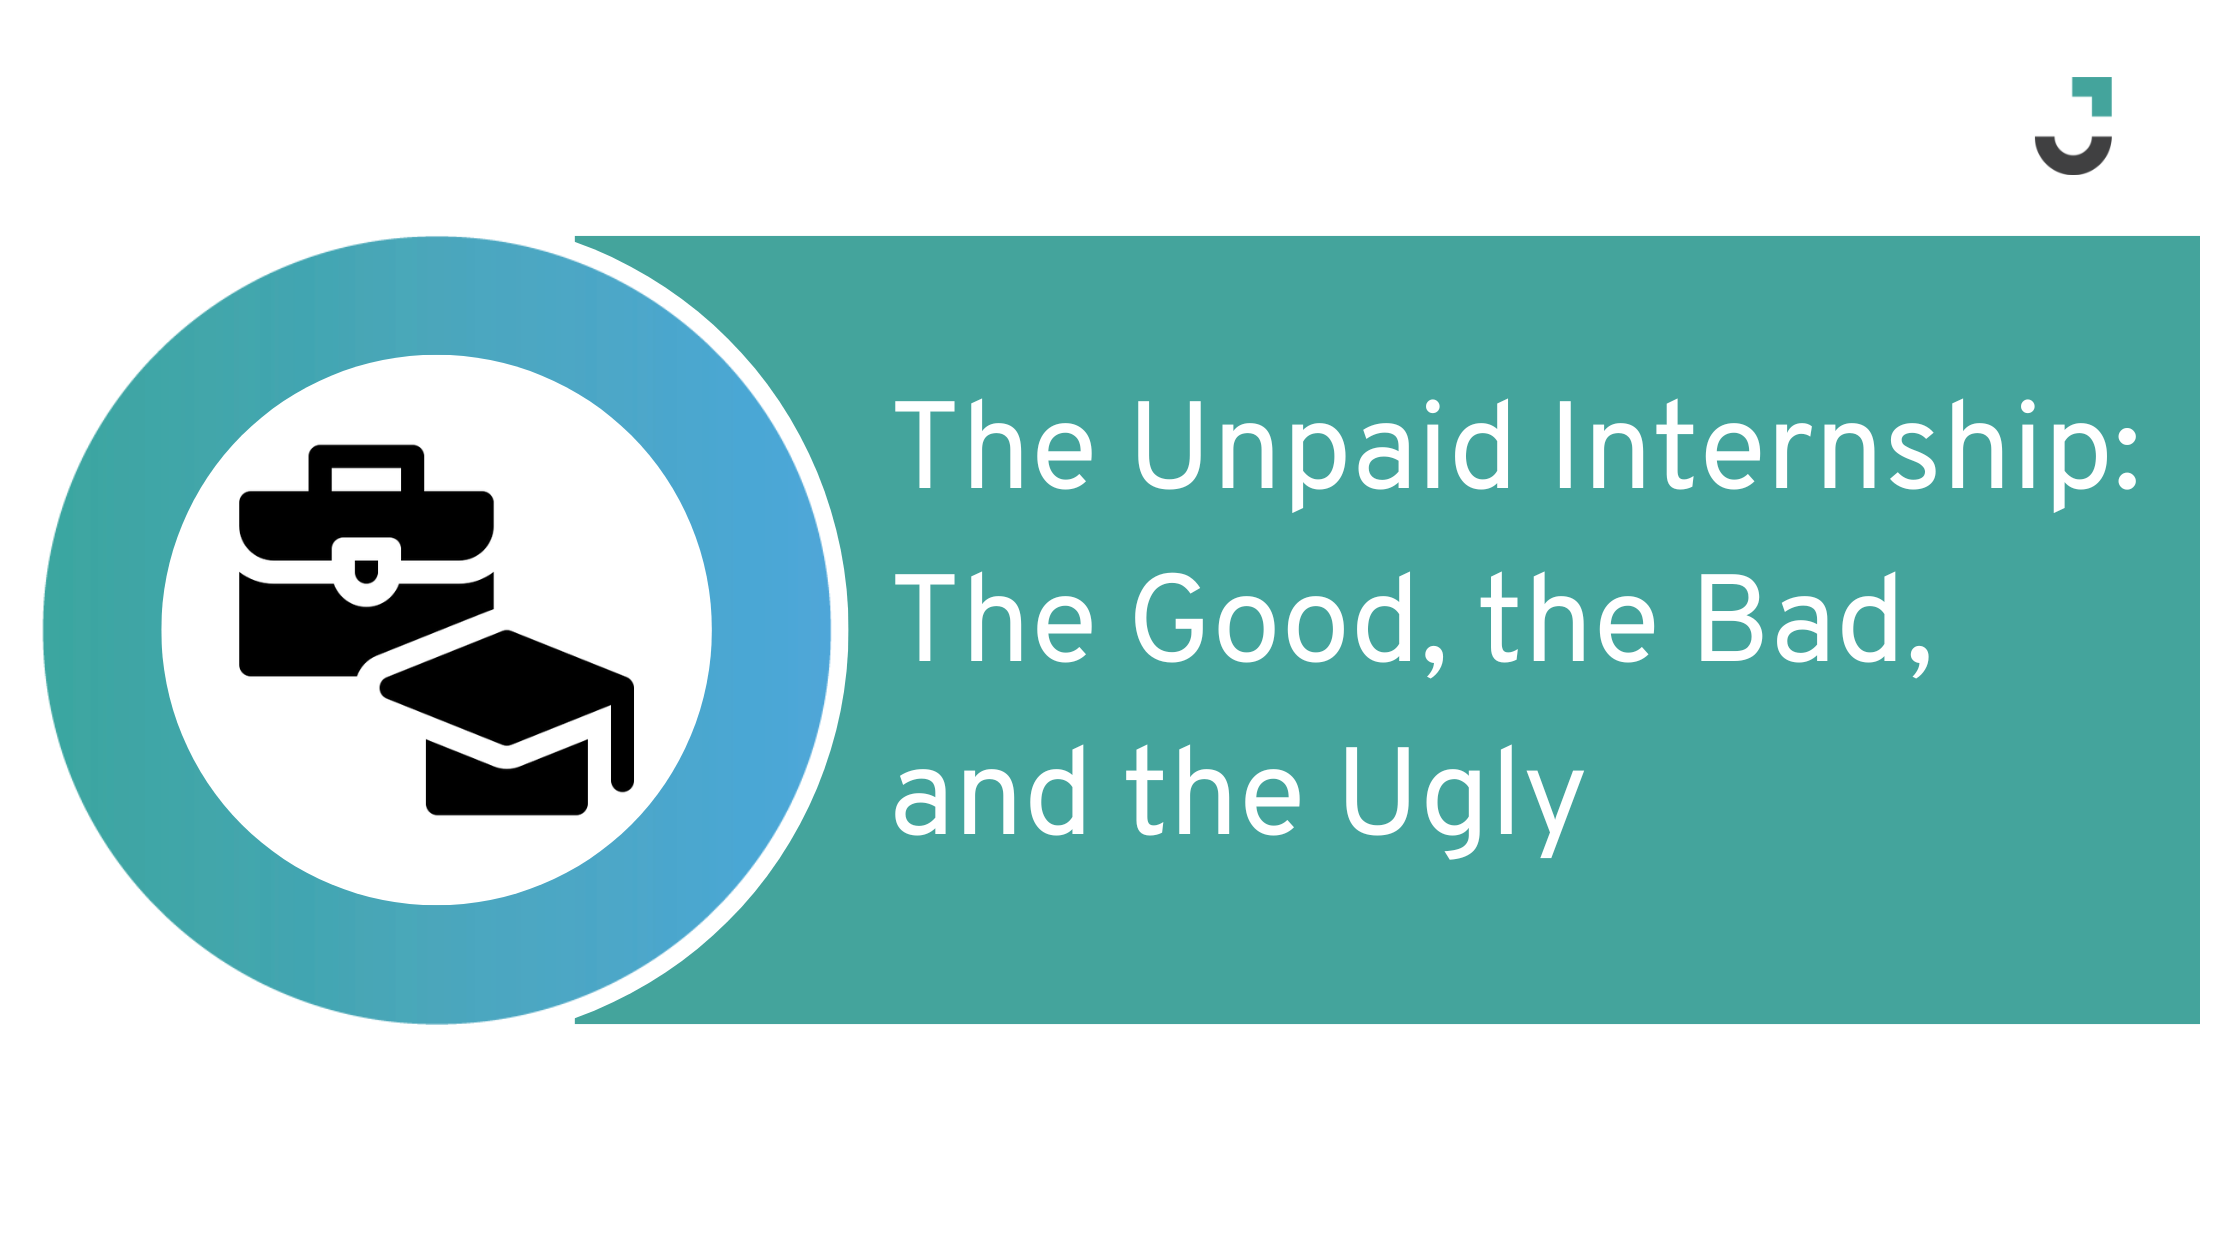 The Unpaid Internship: The Good, the Bad, and the Ugly